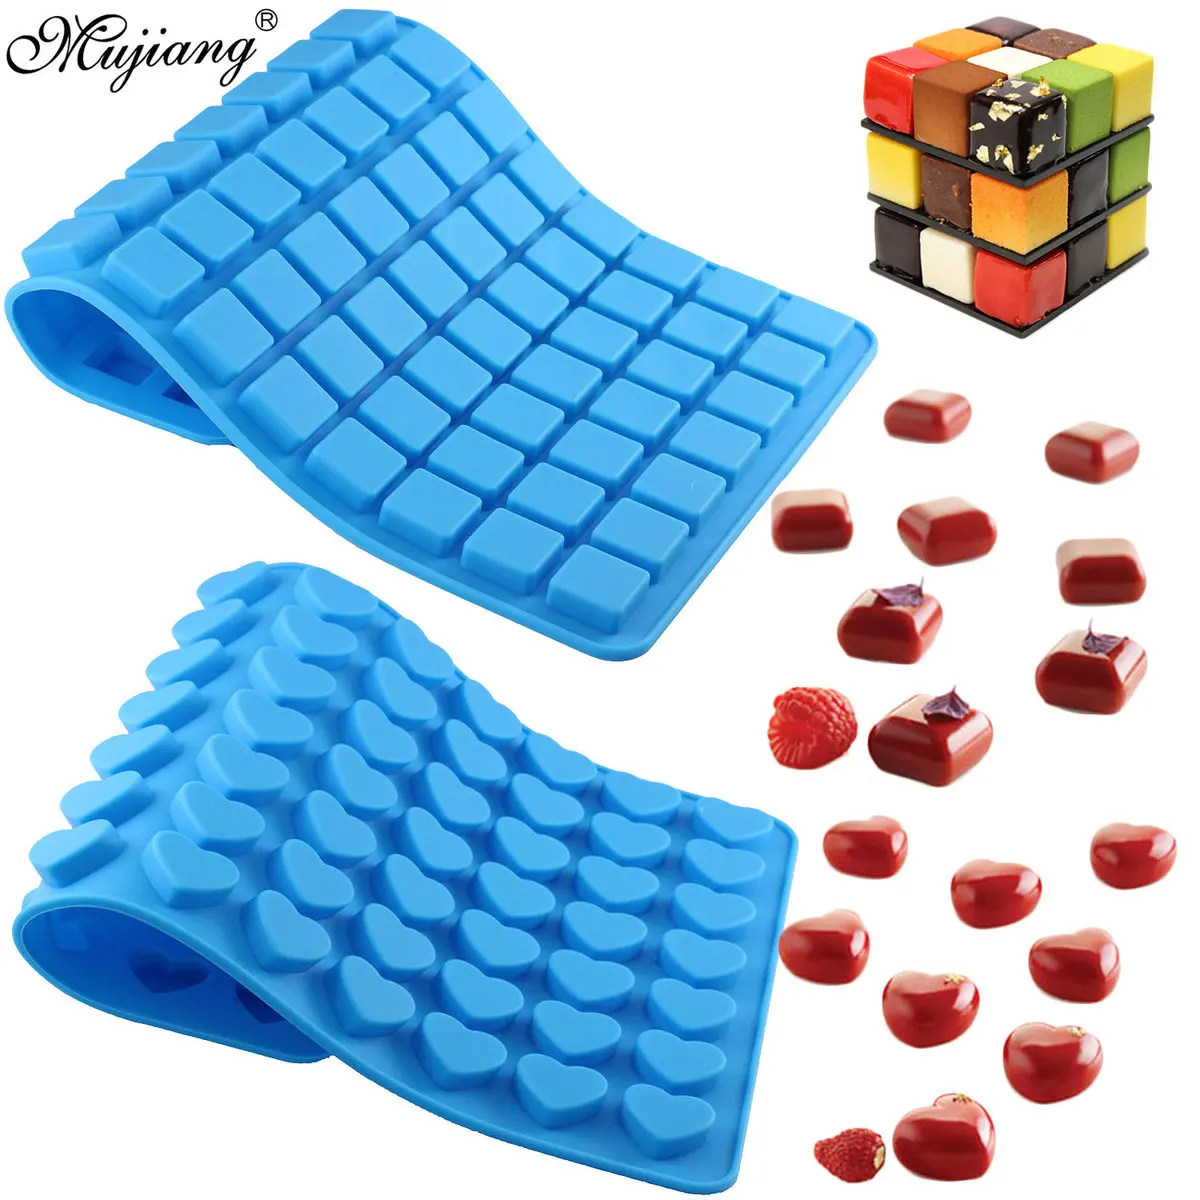 77 Cavity Square 70 Heart Silicone Mold Cake Decorating Ice Tray Jelly Chocolate Hard Candy Gummy Mold DIY Dessert Baking Moulds